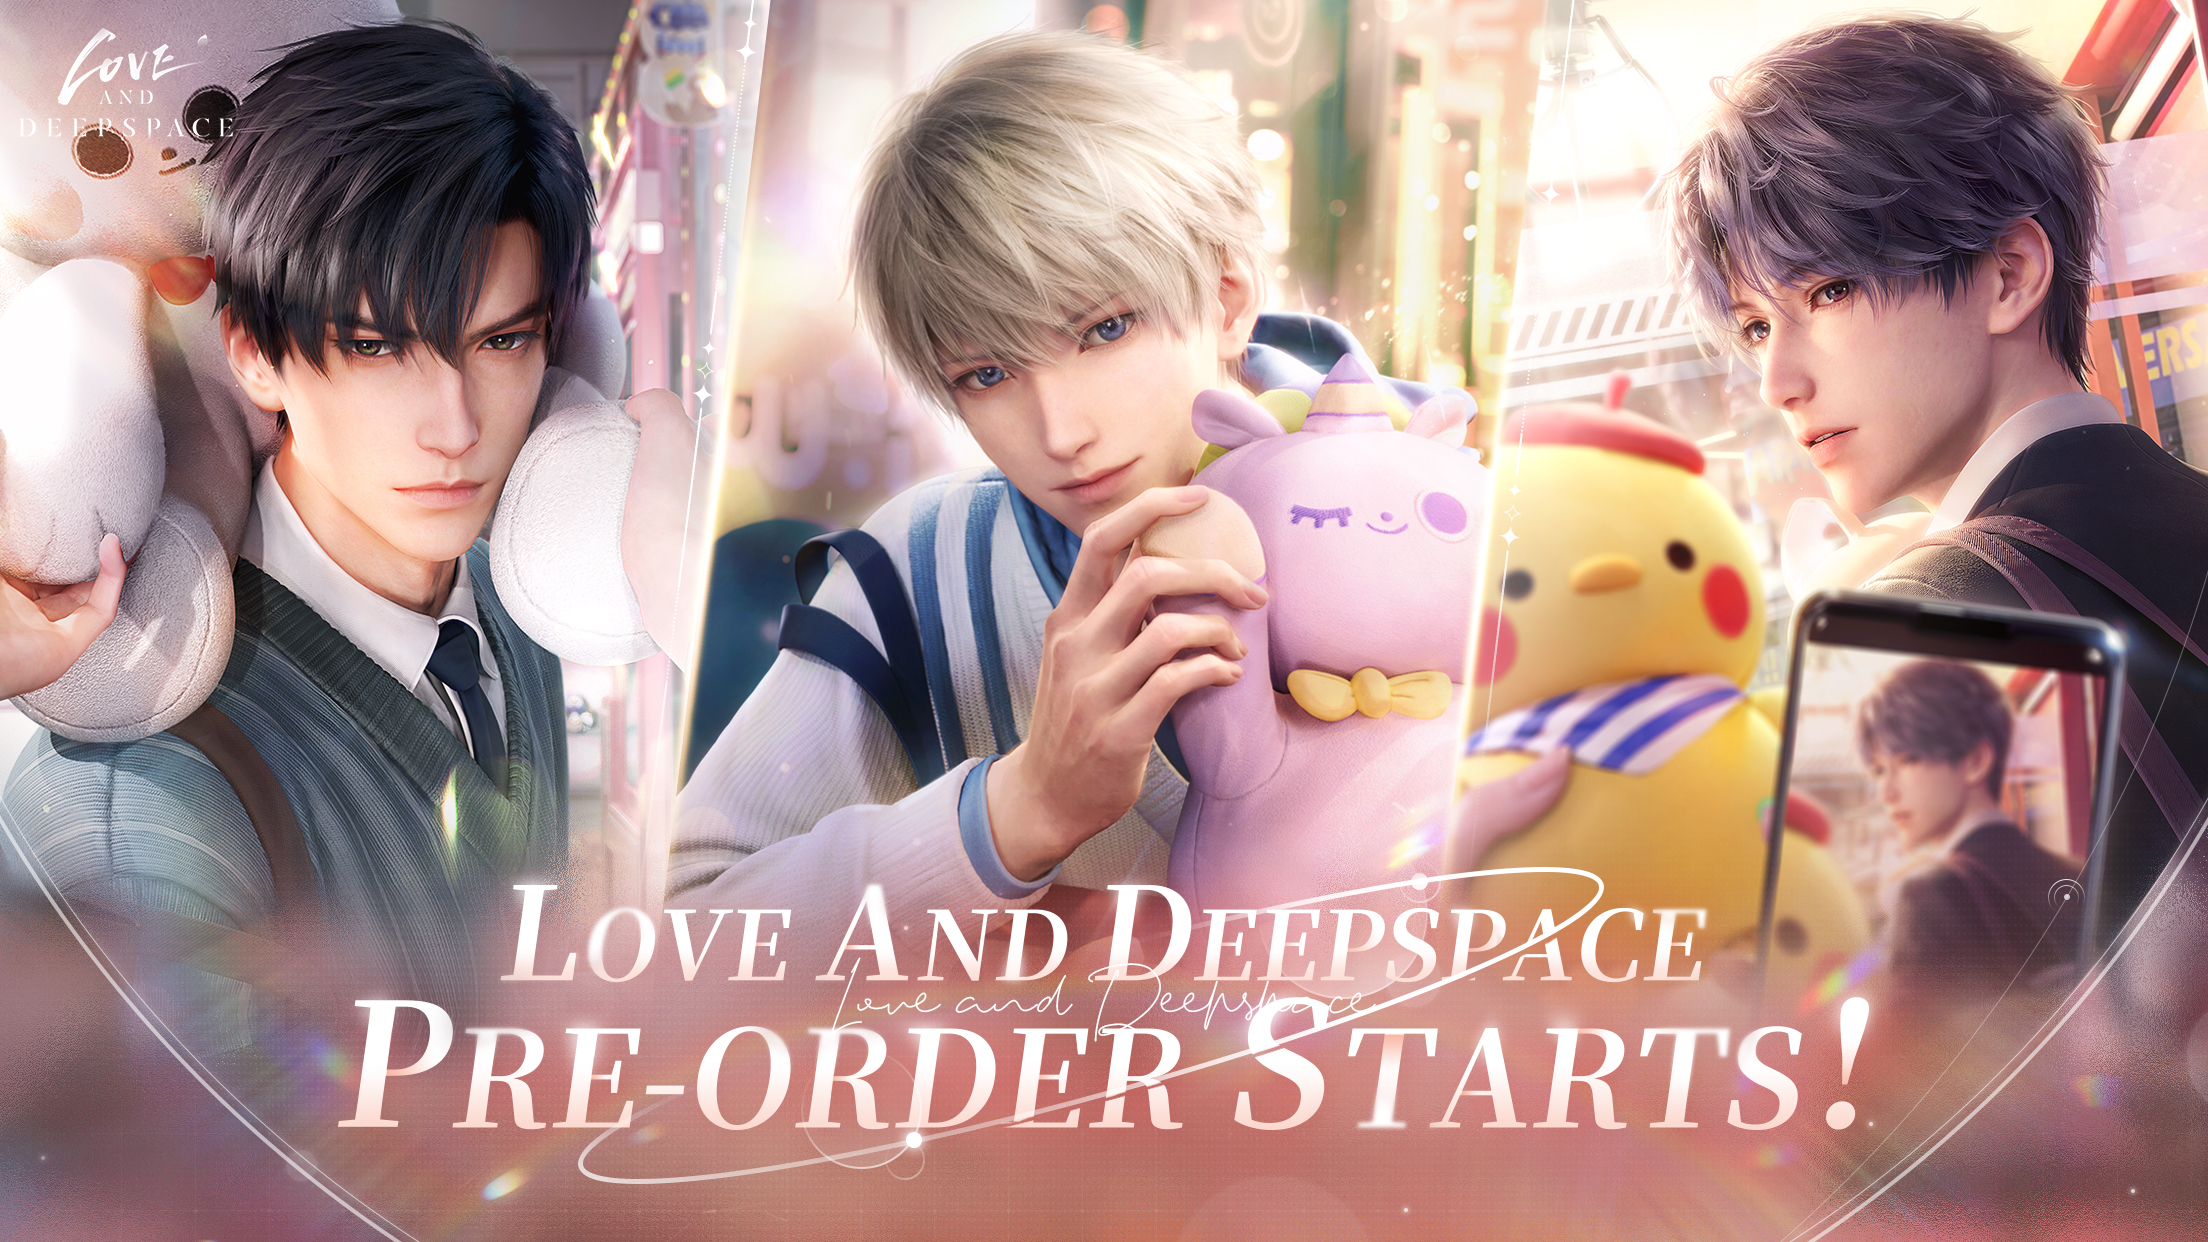 Papergames Announces 3D Otome Game, Love and Deepspace